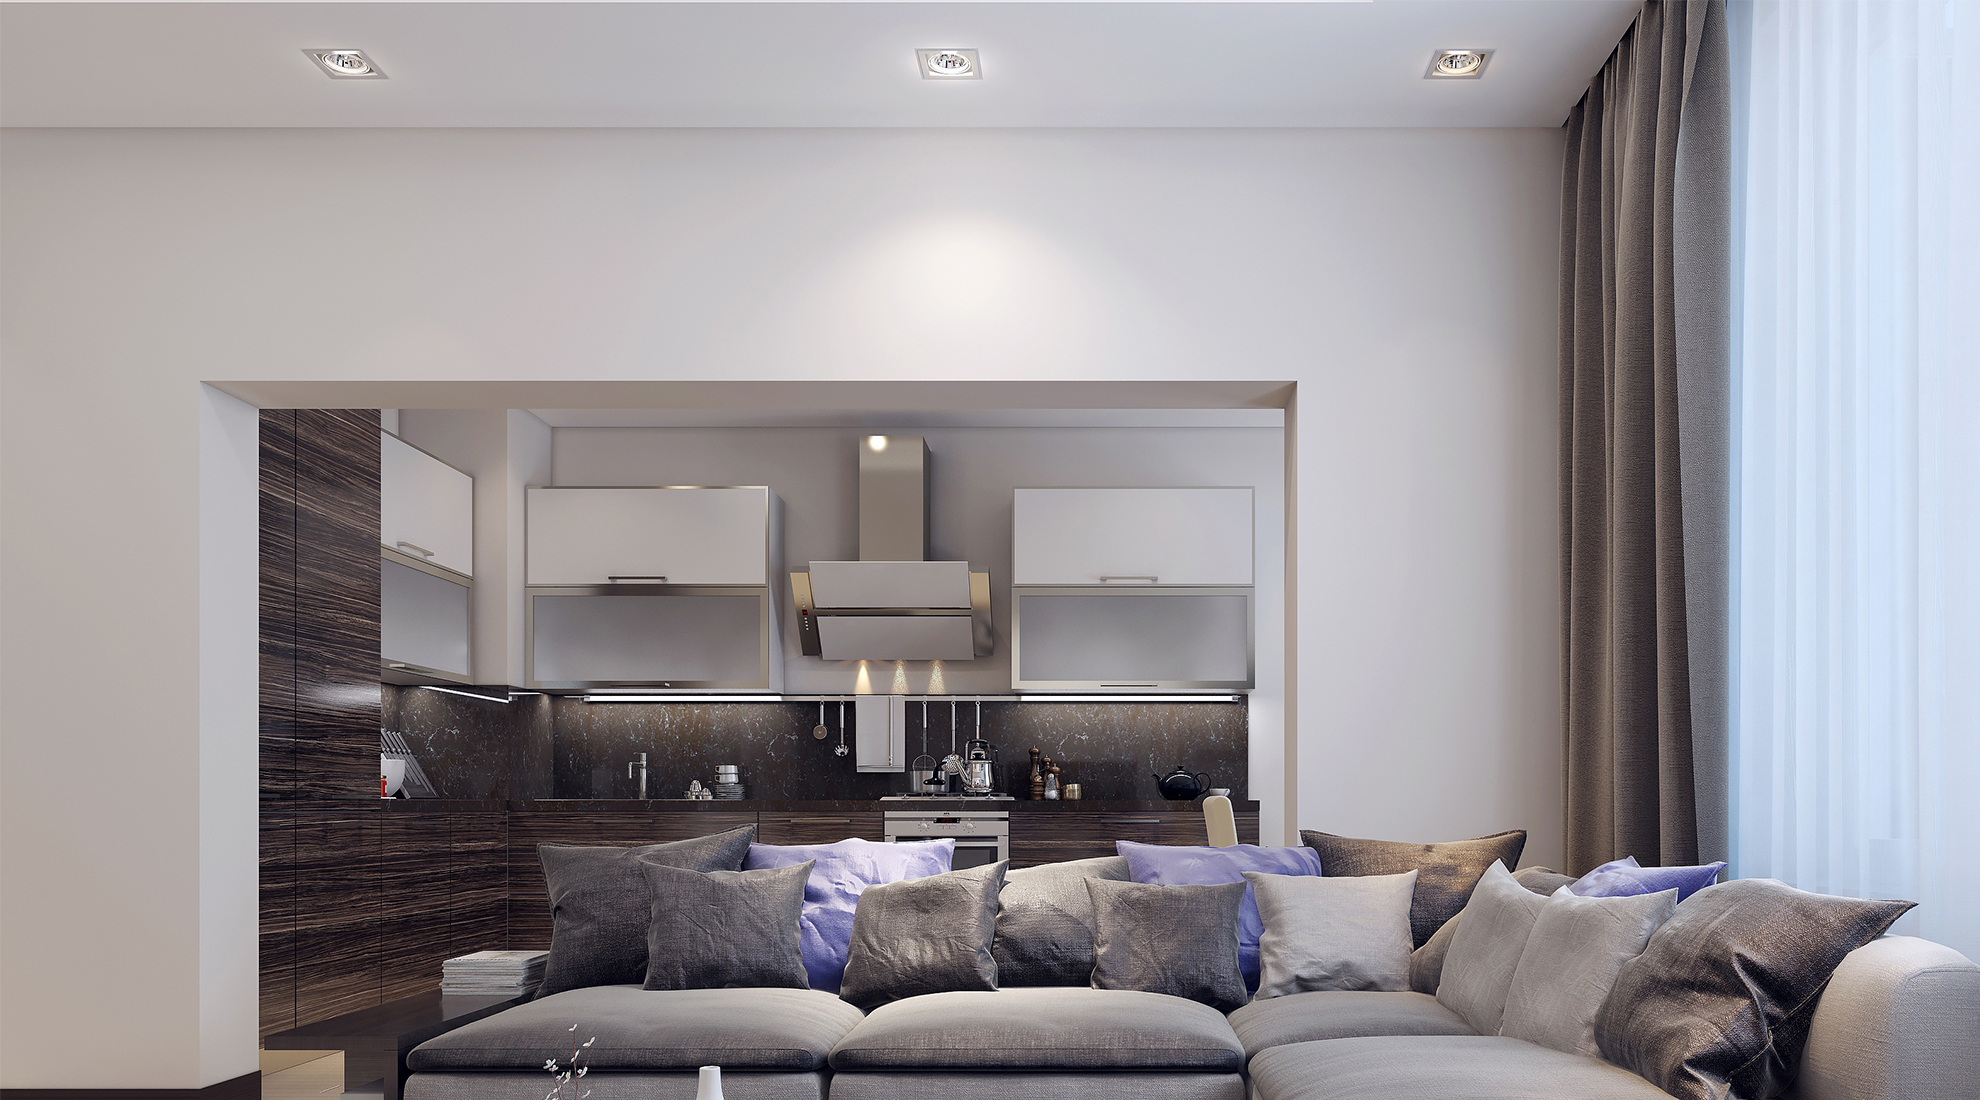 Recessed Lighting Guide How To, Best Size Recessed Lighting For Living Room